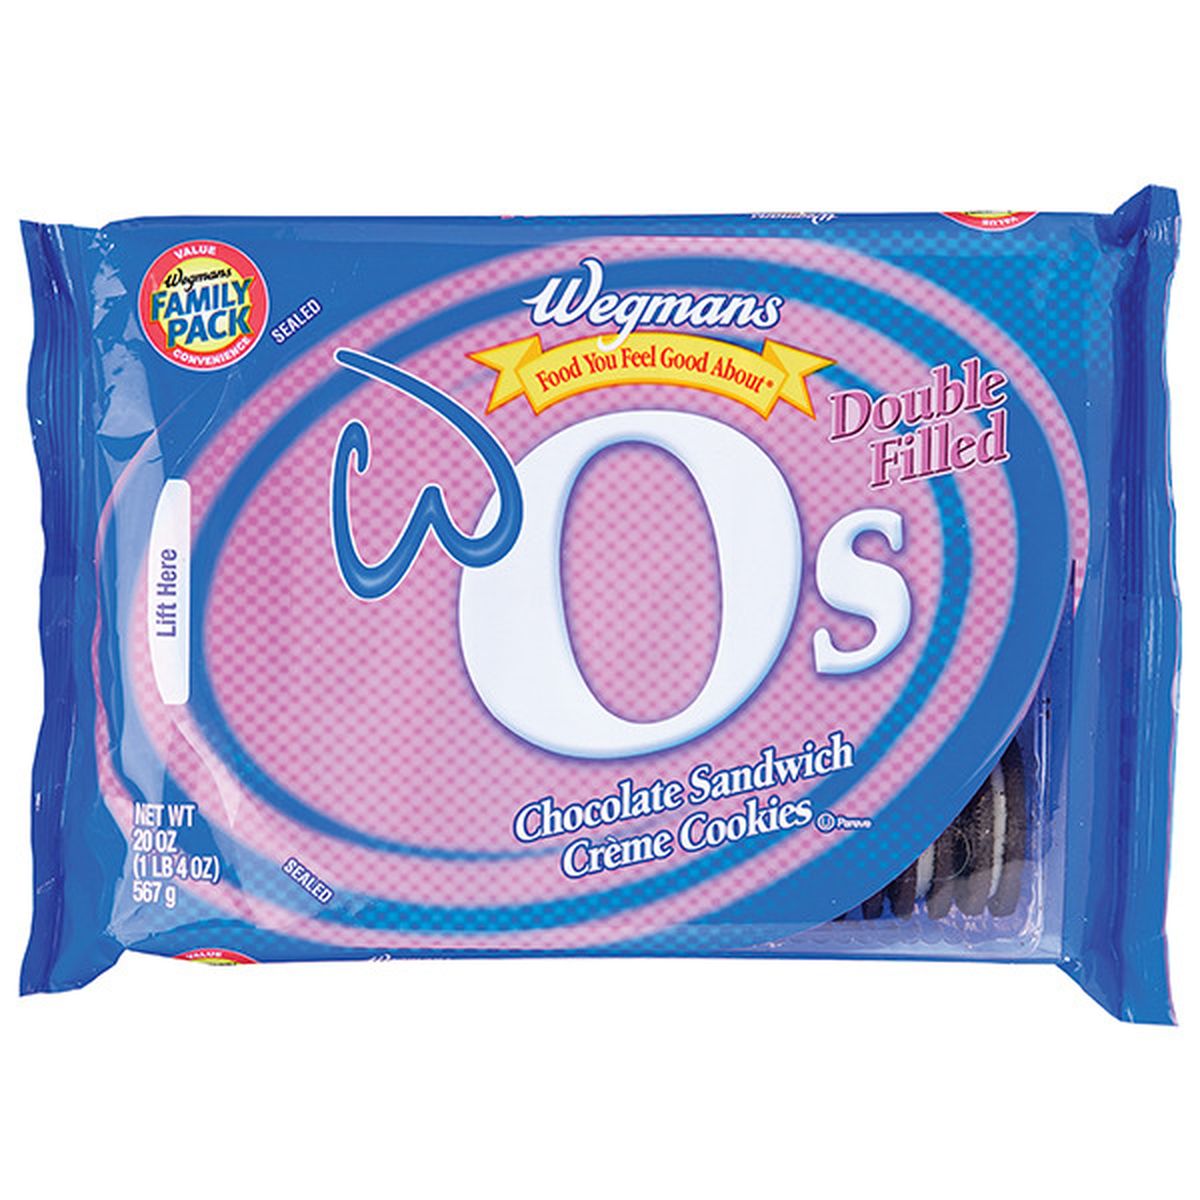 Calories in Wegmans Double Filled Original W O's: CrÃ¨me-Filled Chocolate Sandwich Cookies, FAMILY PACK